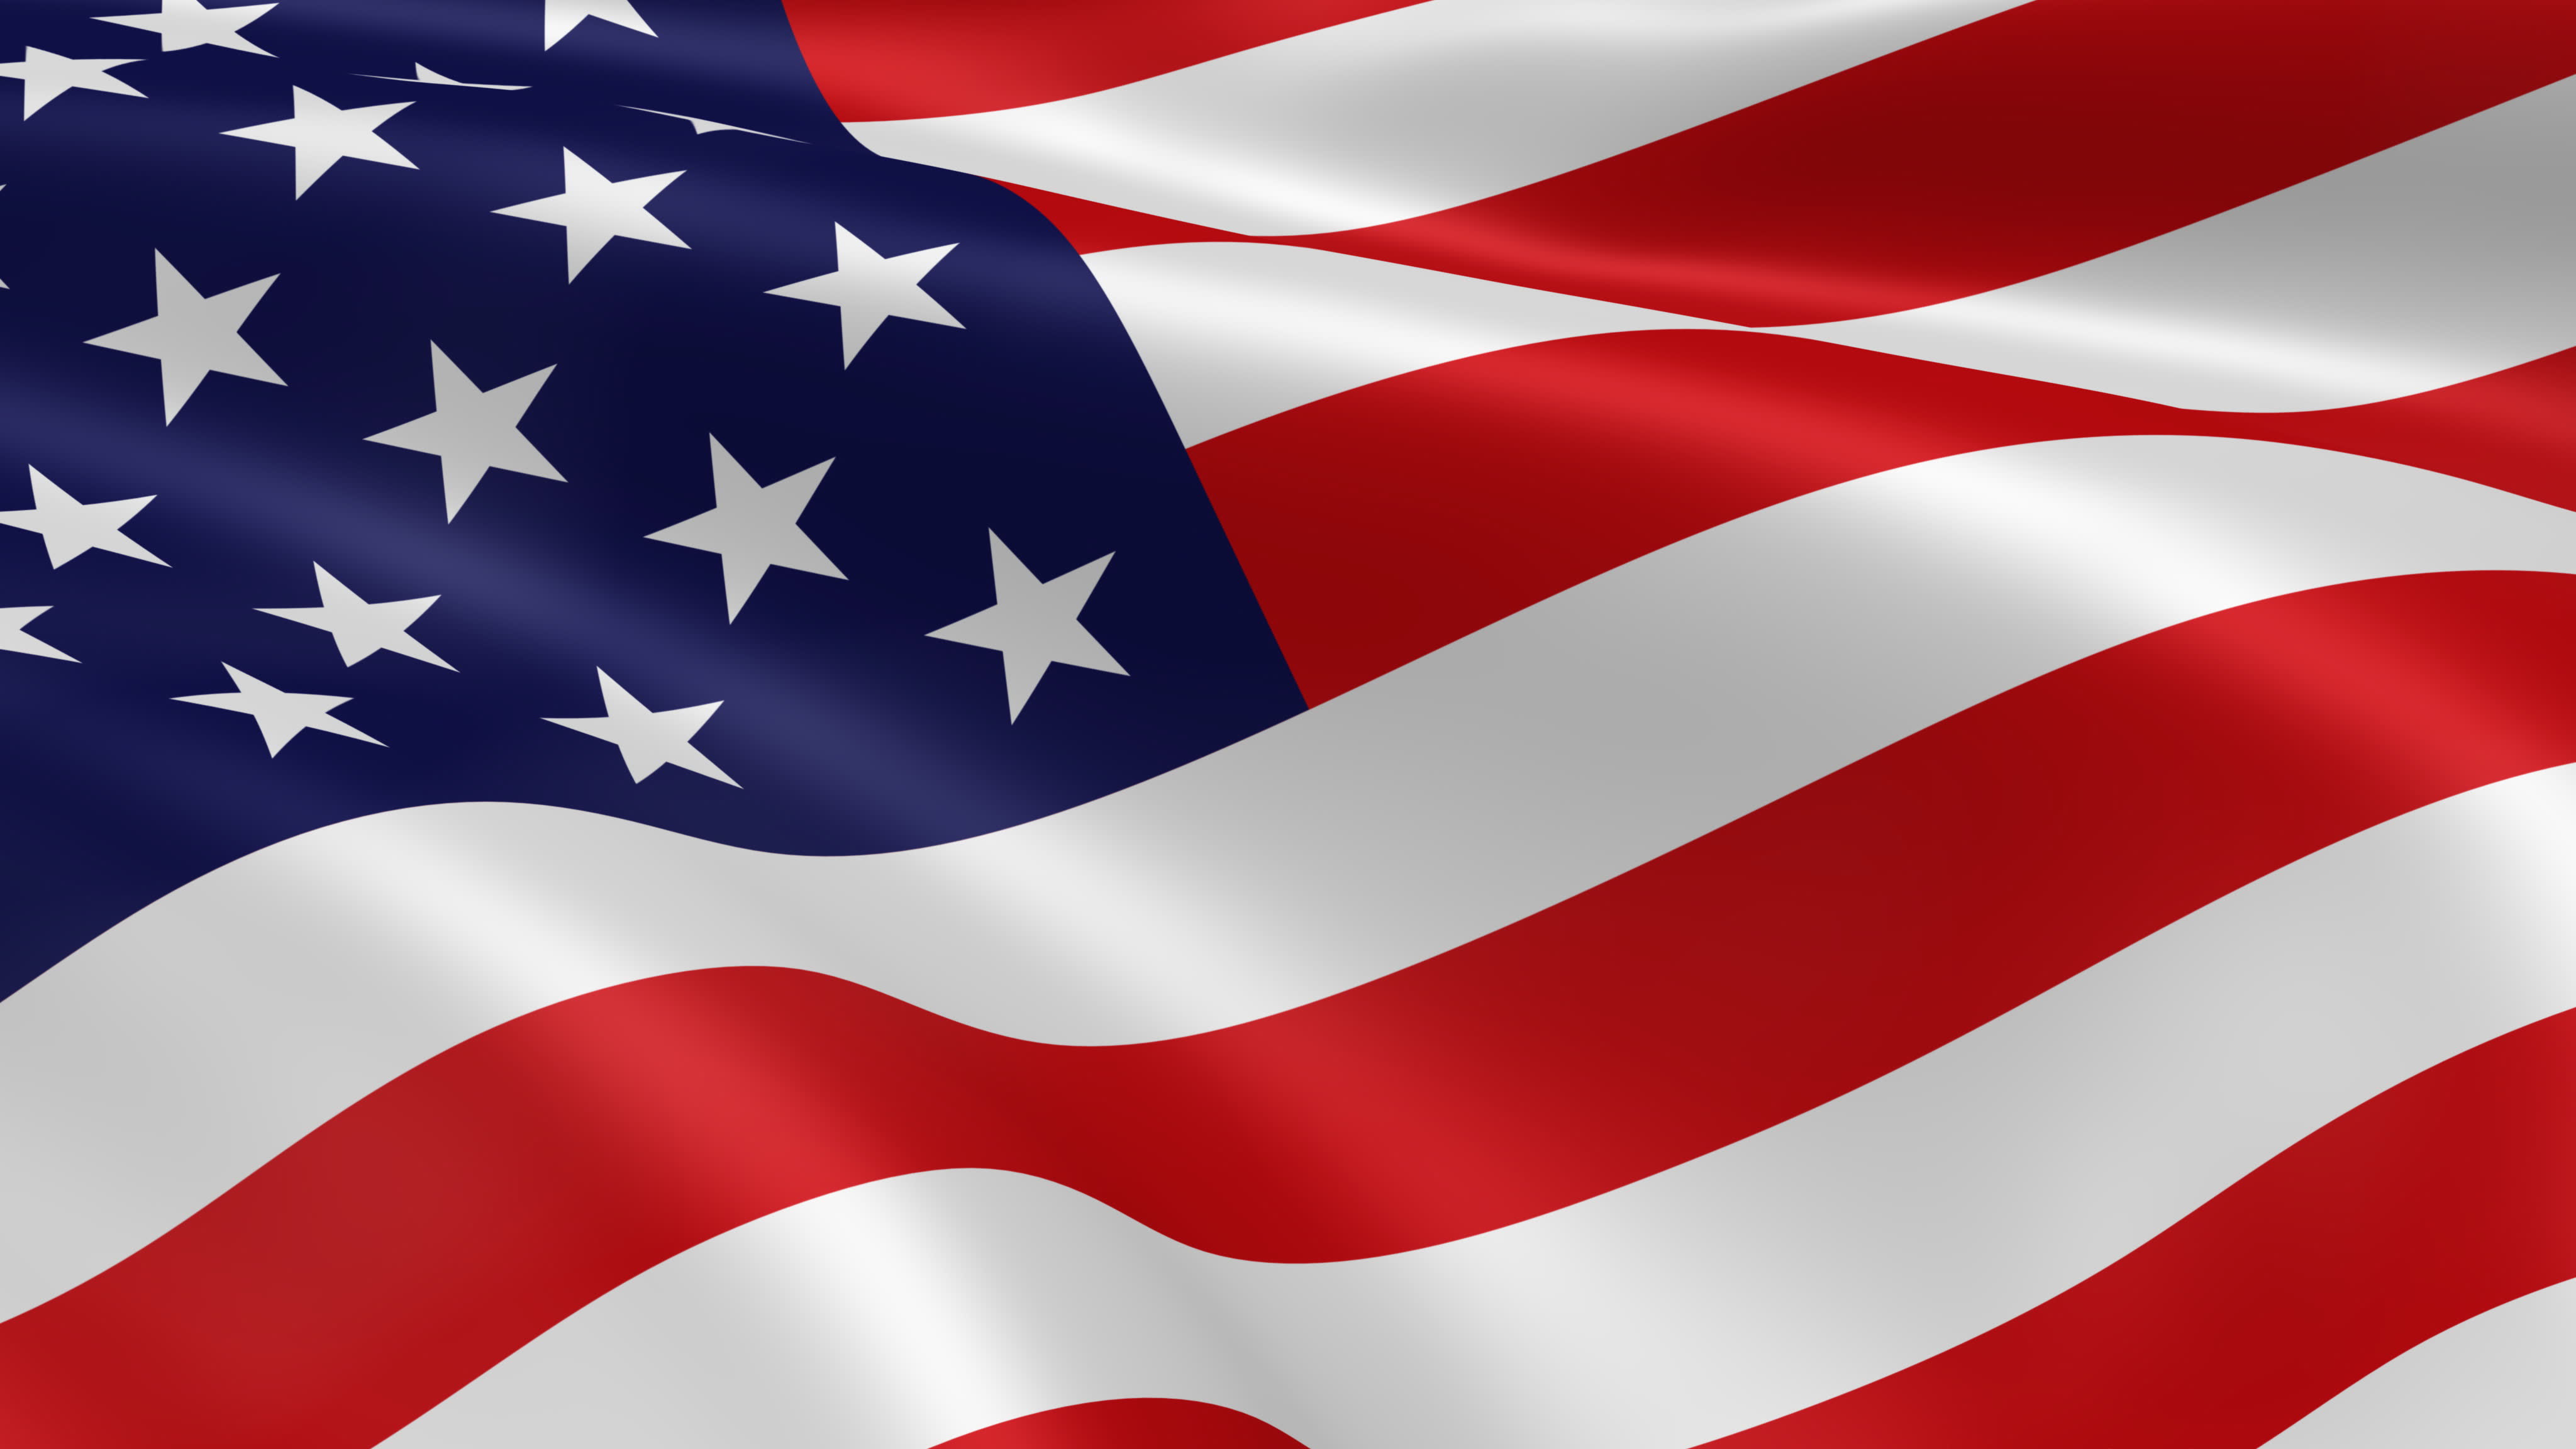 american flag clip art free download - photo #32